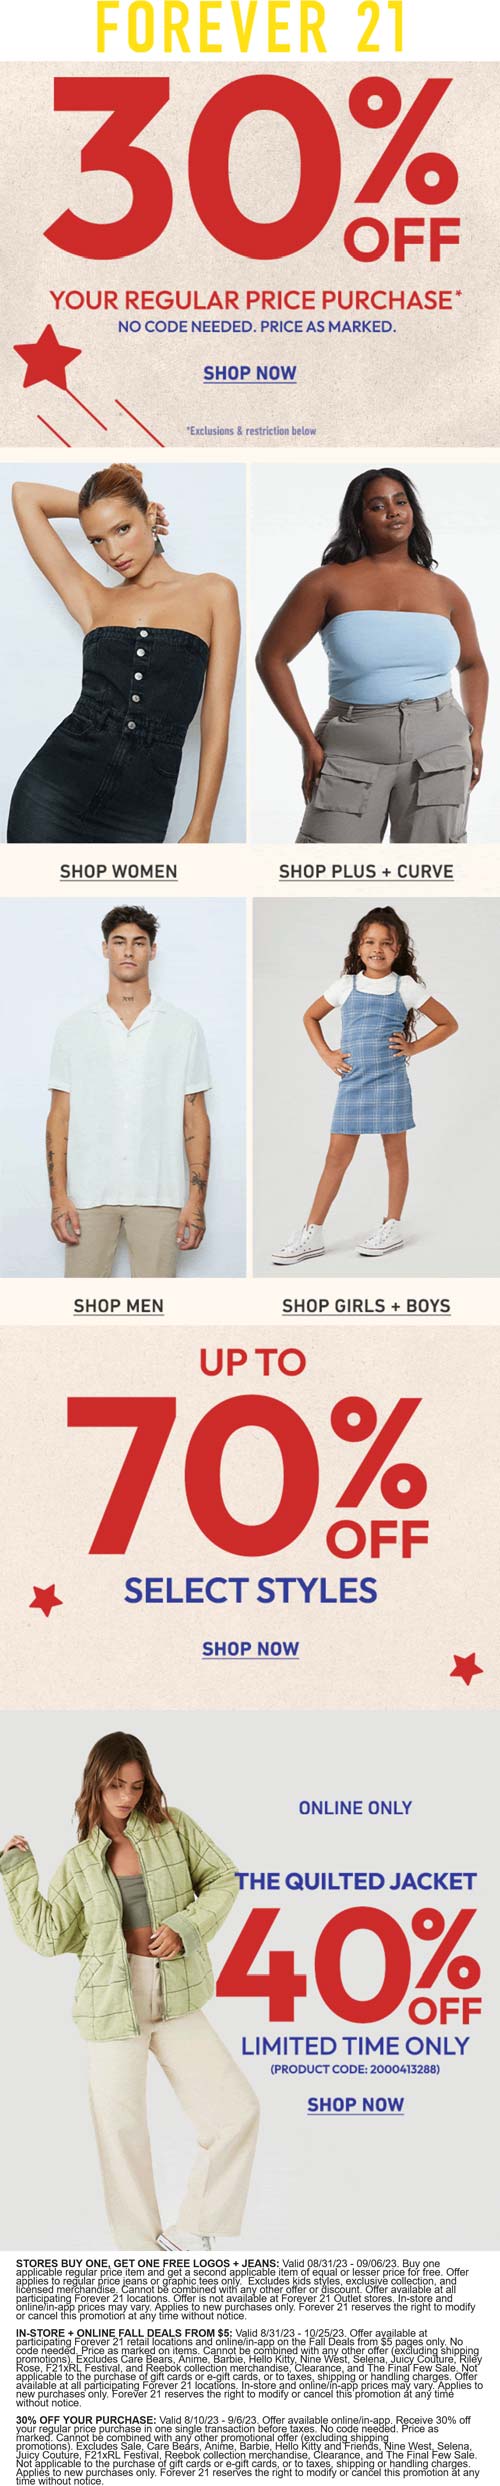 Forever 21 stores Coupon  30% off & more online today at Forever 21 #forever21 